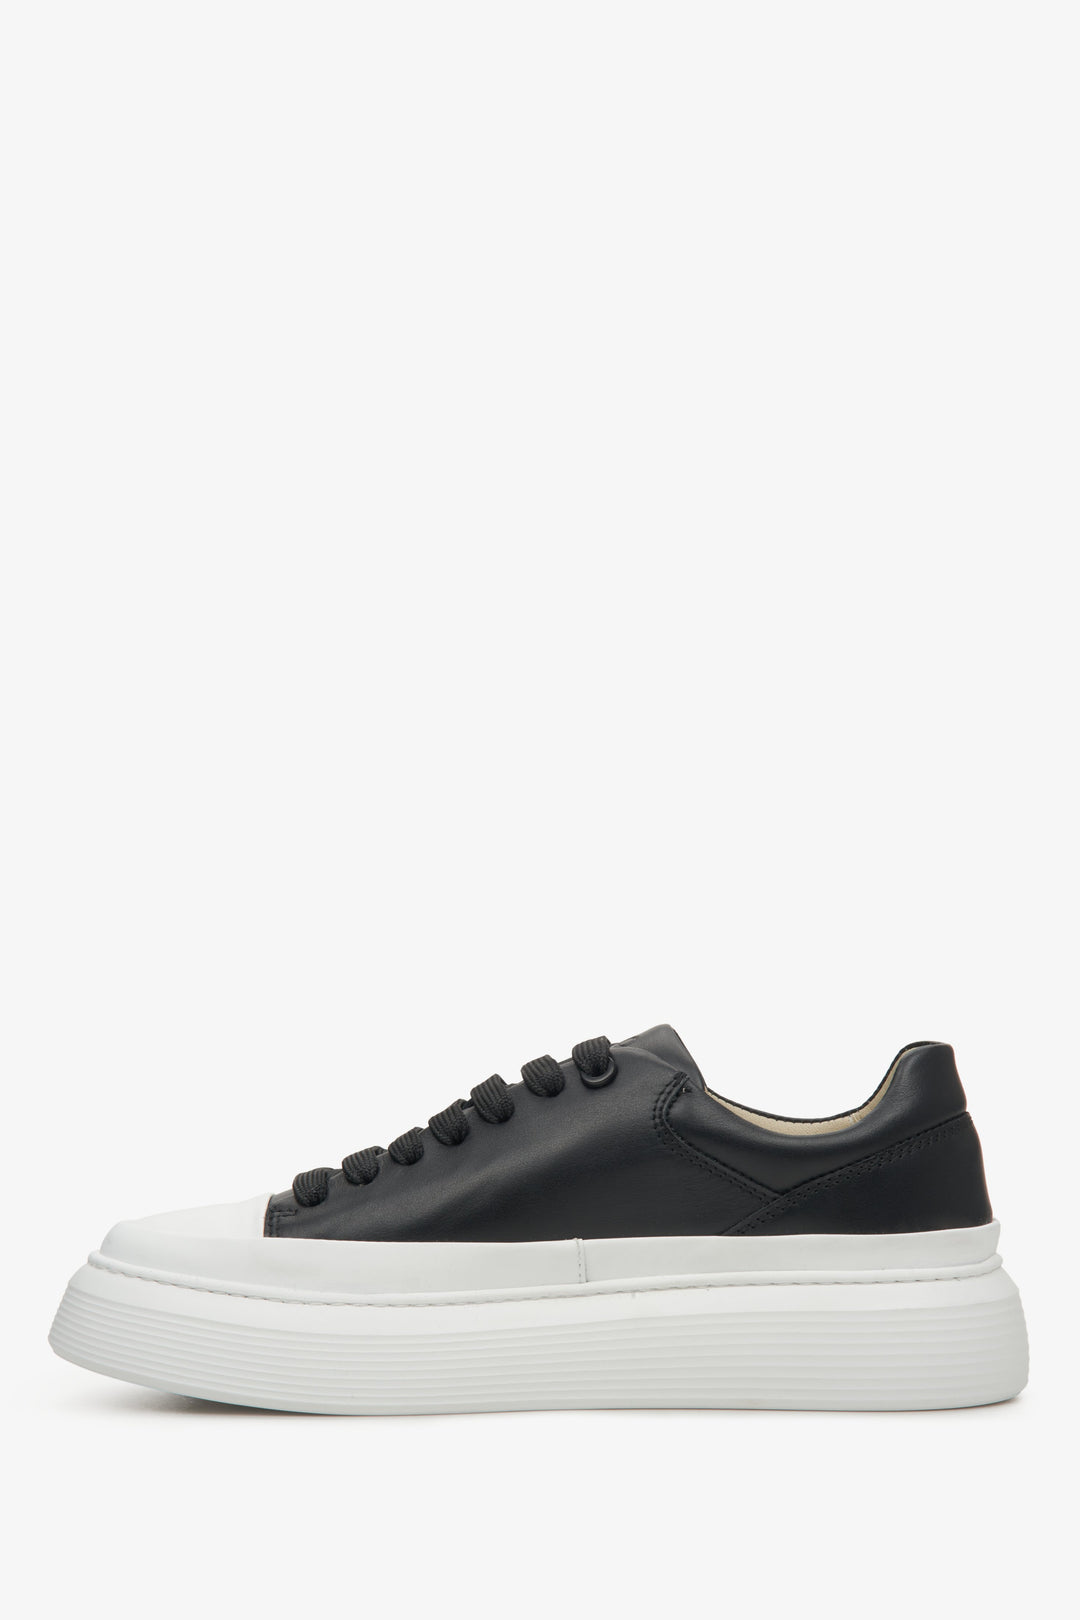 Women's sneakers on with thick rubber sole in black Estro - shoe profile.